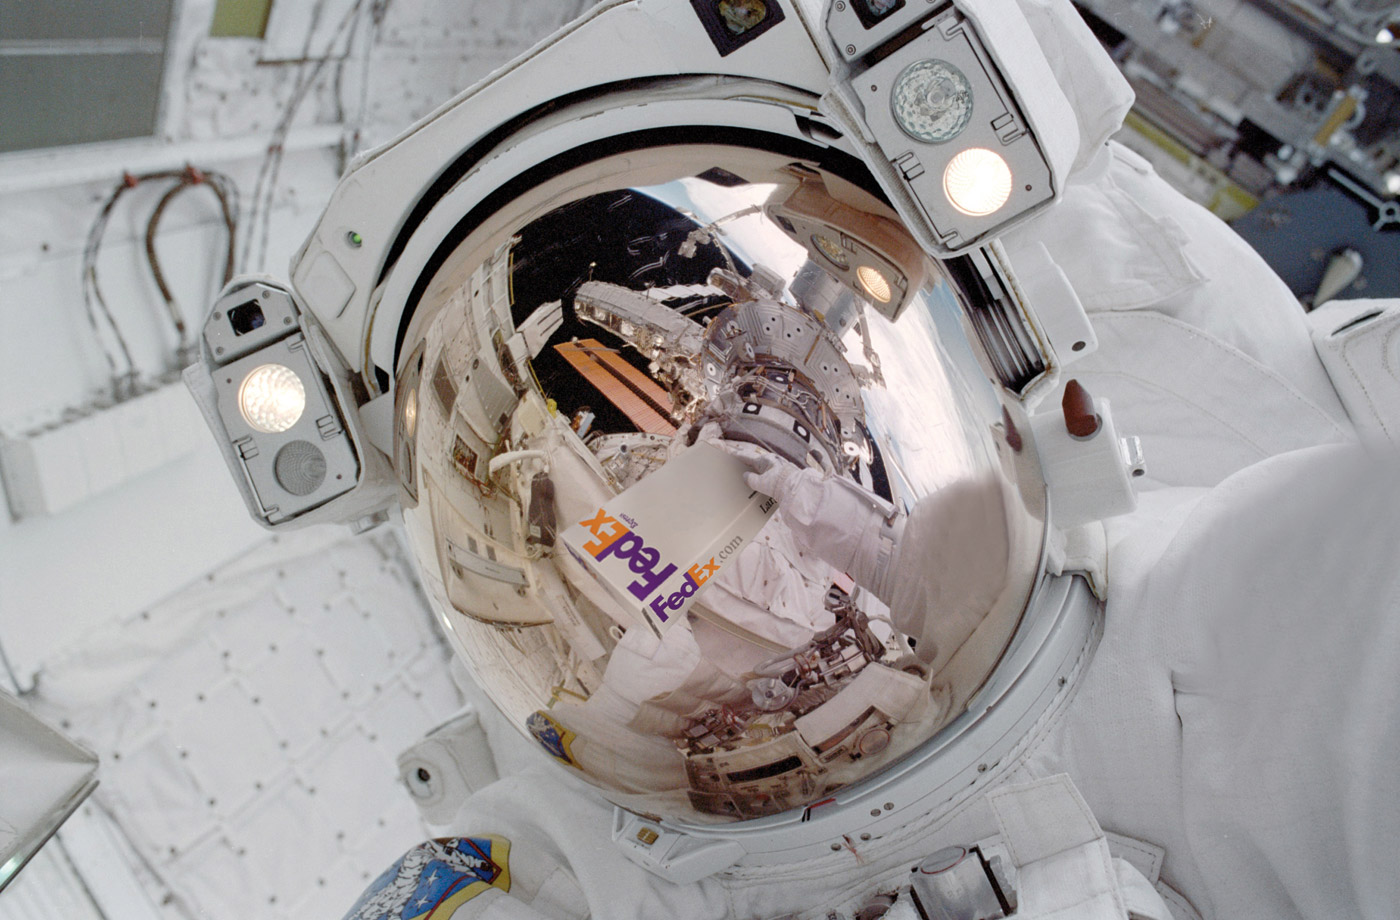 astronaut's reflection as he floats in the space shuttle